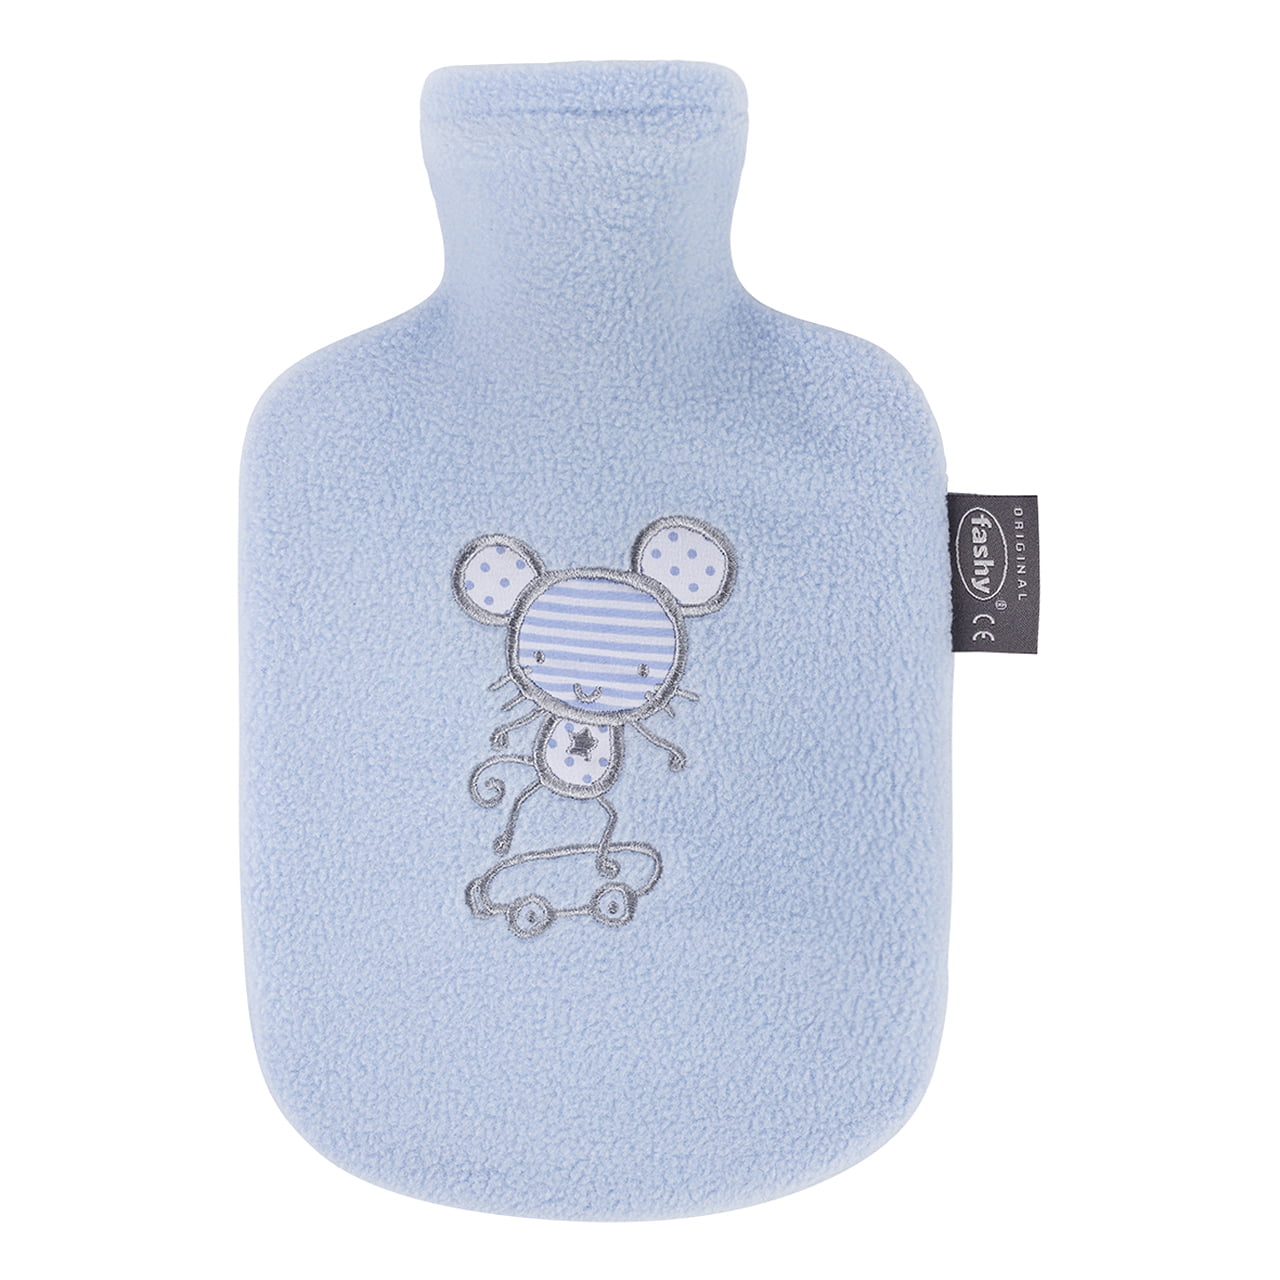 Fashy Hot Water Bottle with Fleece Cover with Embroidery Light Blue for ...